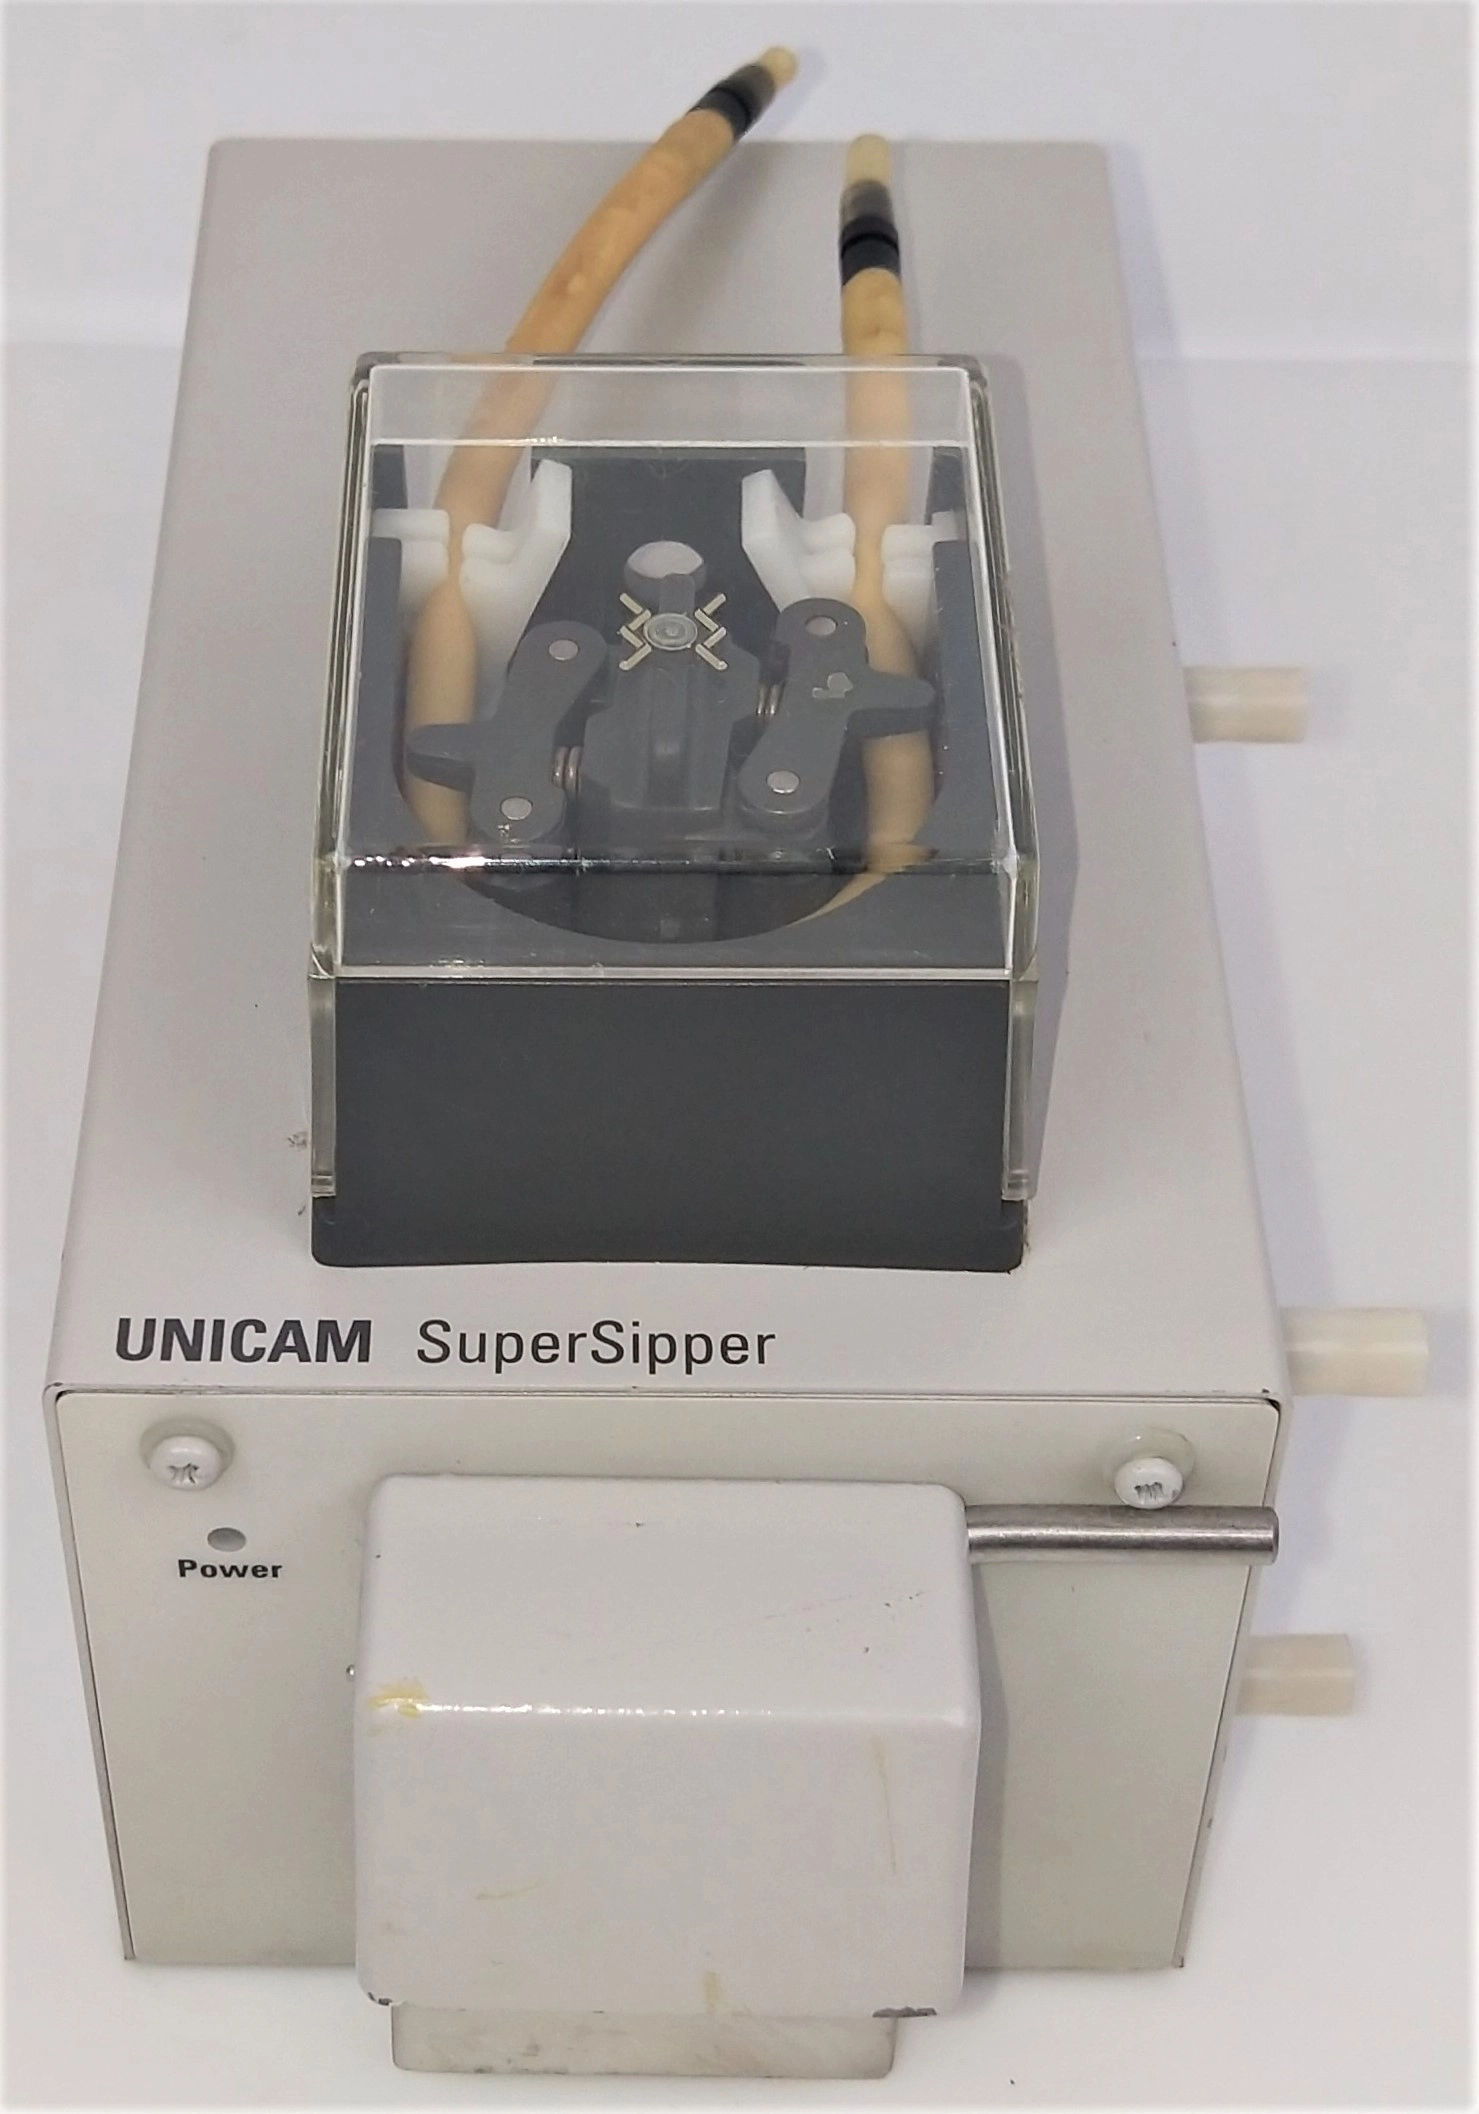 Watson Marlow Auto Control 32RPM Super Sipper for Unicam UV-Visible Spectrometer